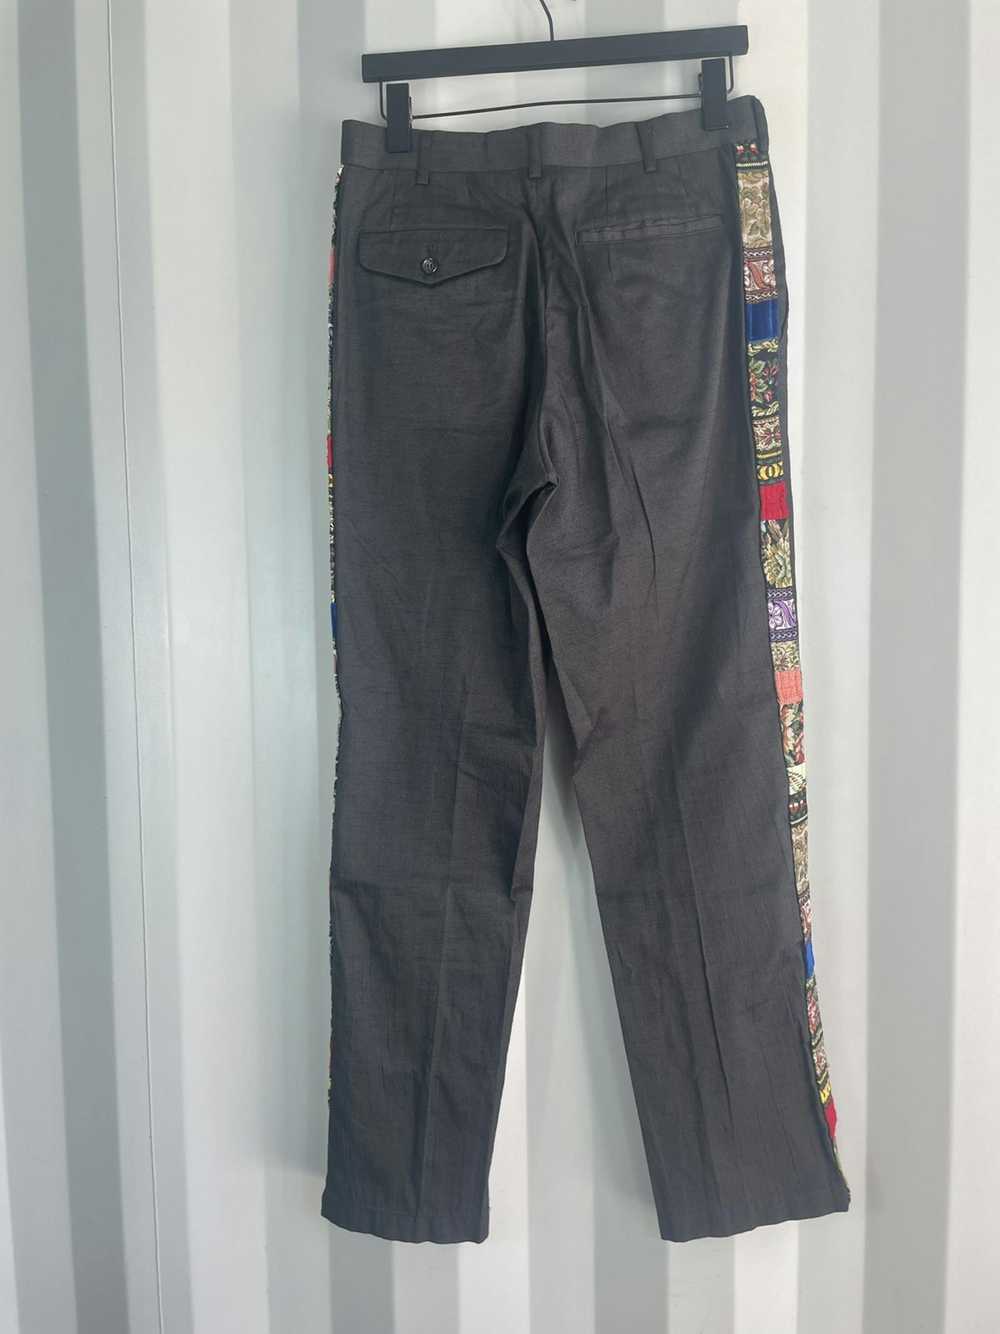 Comme des Garcons Homme Tapestry Trousers - image 6